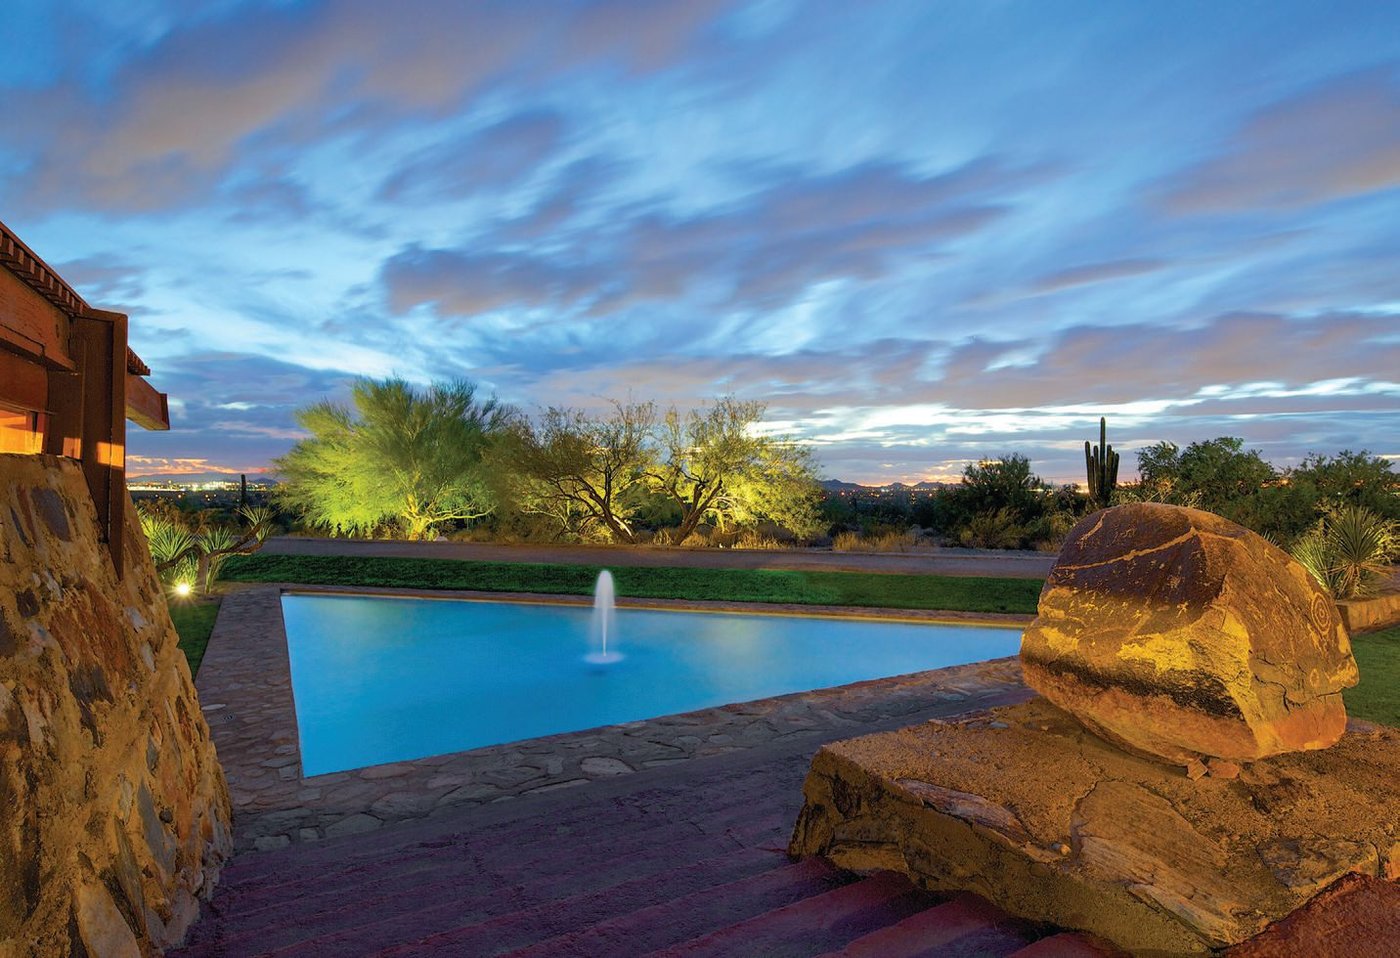 The exterior of Frank Lloyd Wright’s Taliesin West and reflecting pond at dusk PHOTO: BY ANDREW PIELAGE FOR TALIESIN WEST